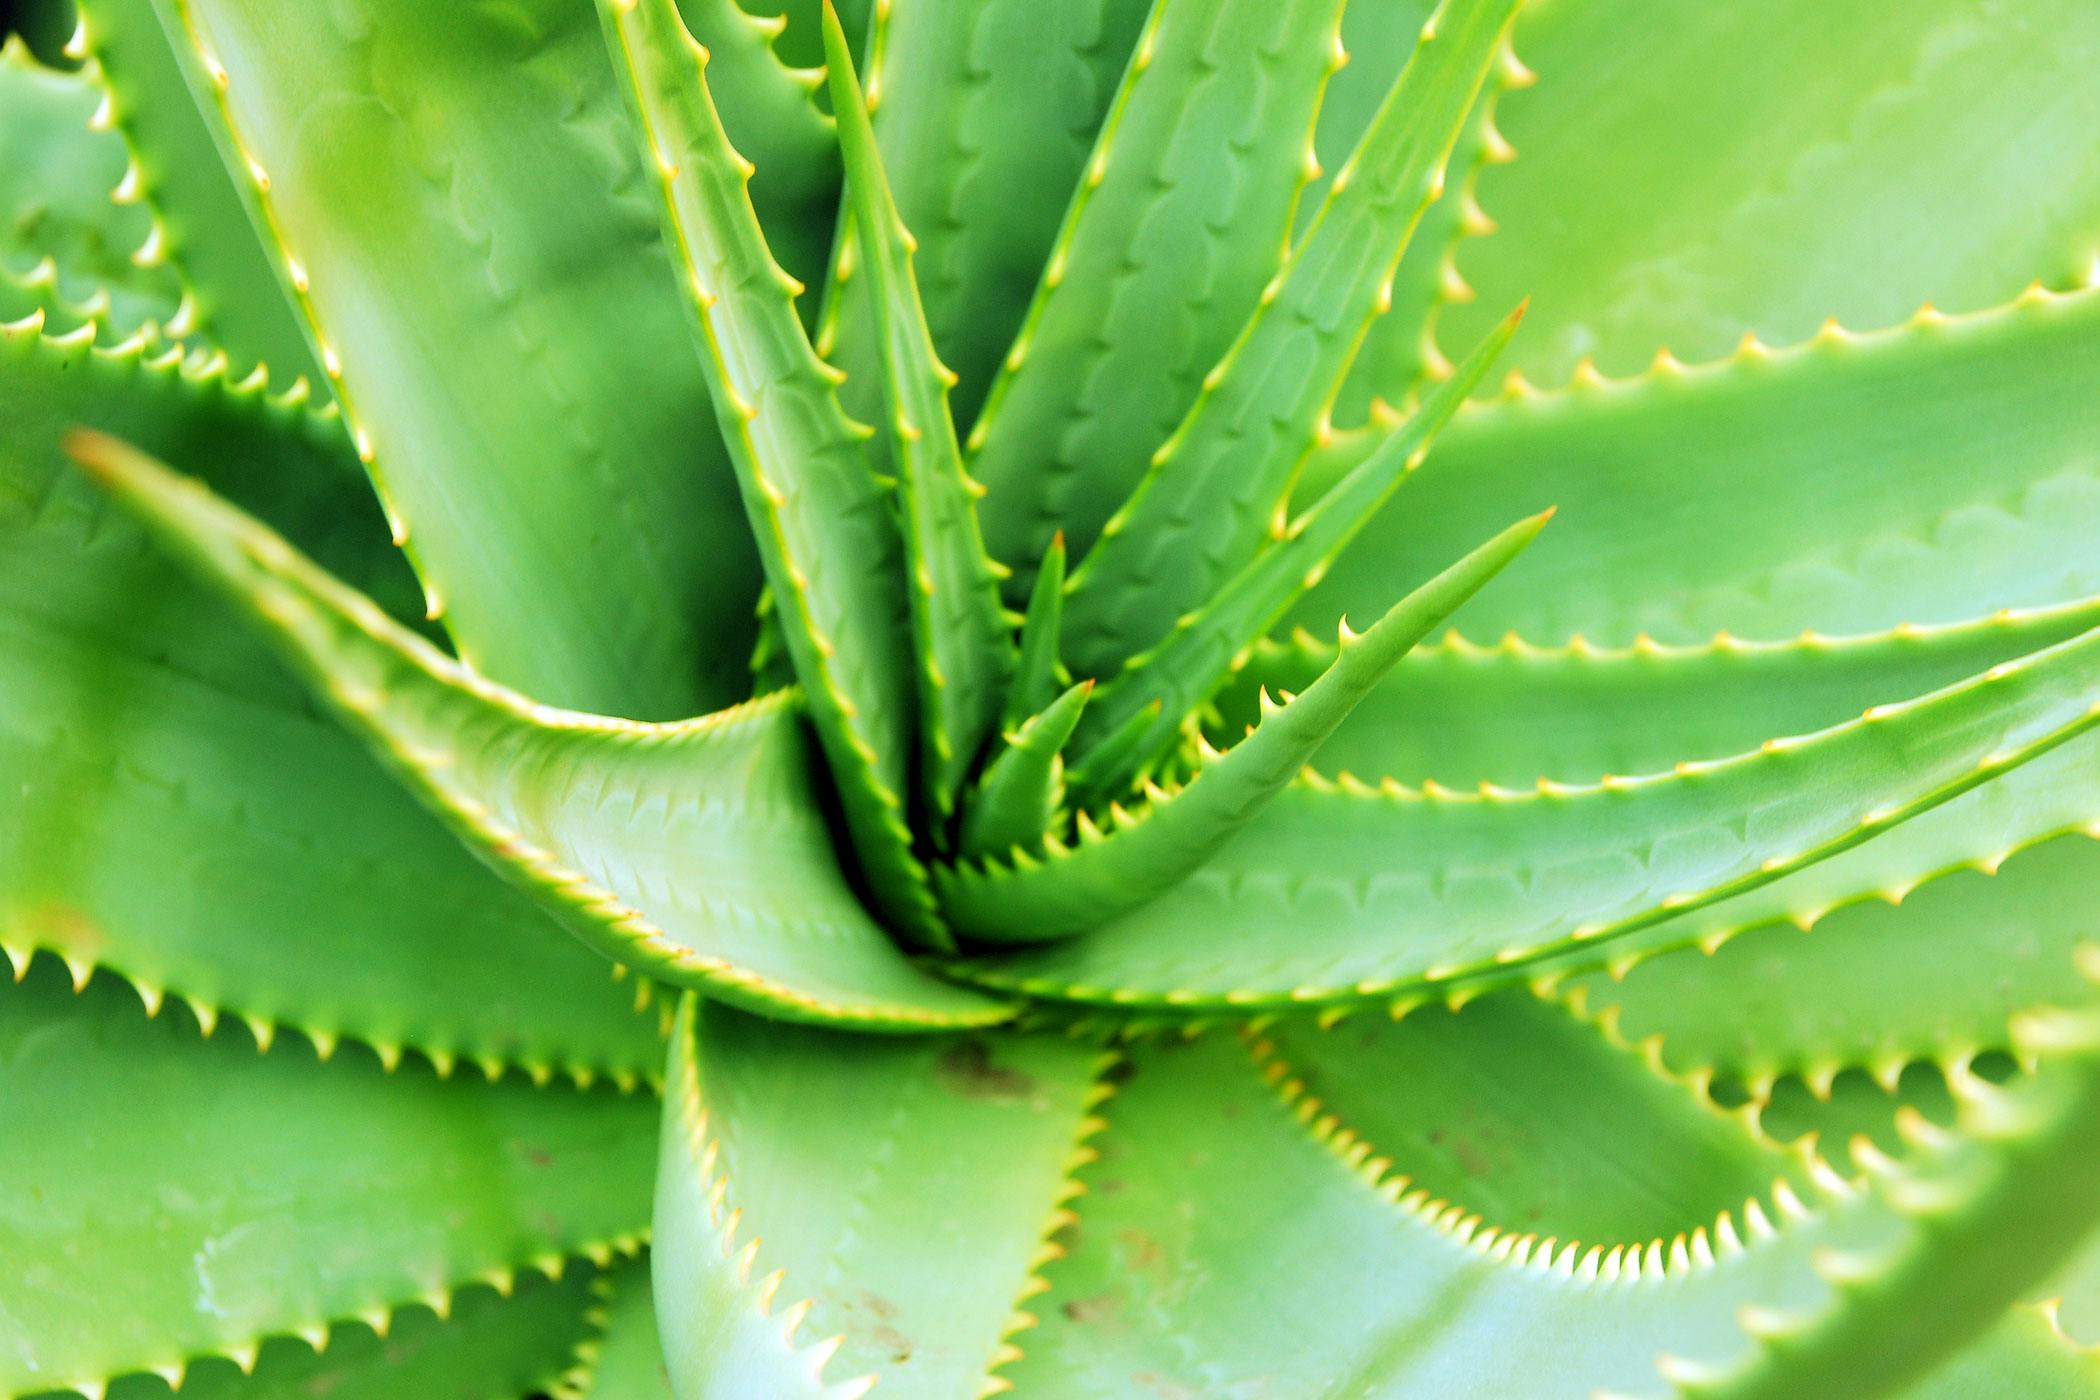 is aloe vera plants poisonous to dogs